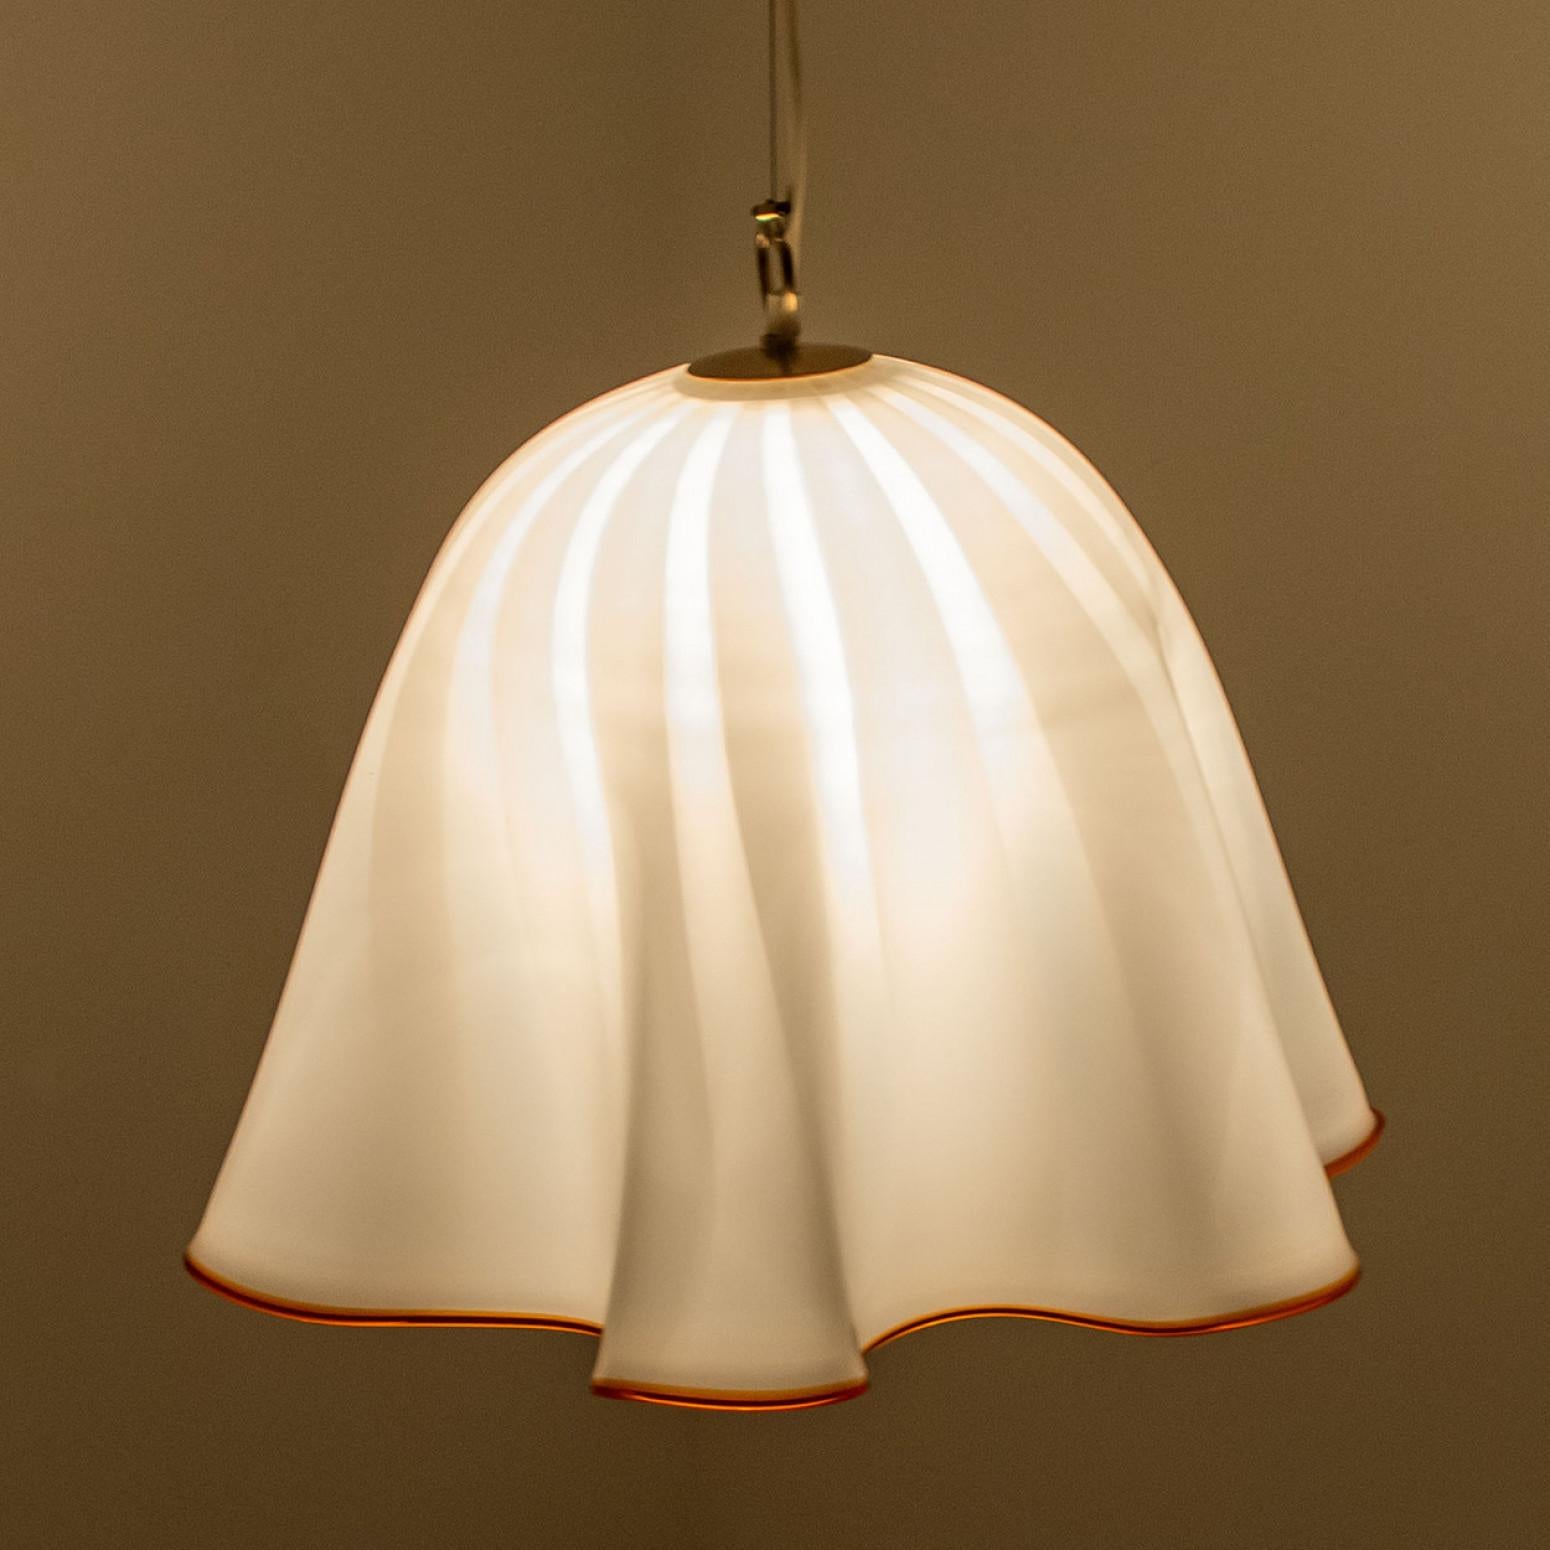 1 of the 2 Large Murano Glass Fazzoletto Pendant Light by J.T. Kalmar, 1960s For Sale 6